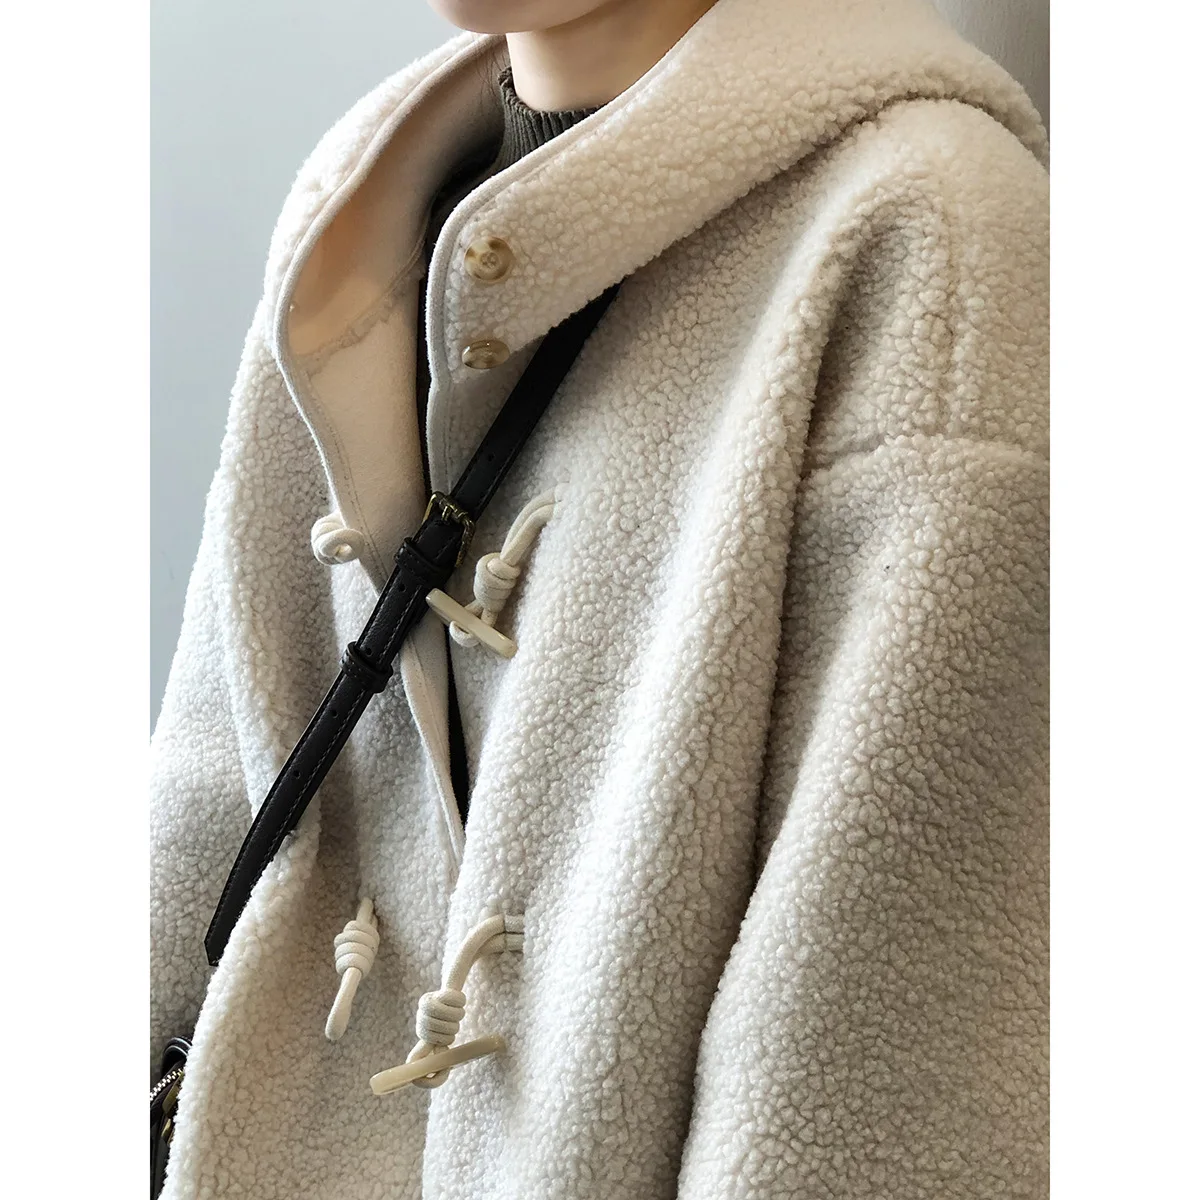 Hooded Lambswool Jacket Women In The Long Section 2022 Winter New Loose Design Sense Coat